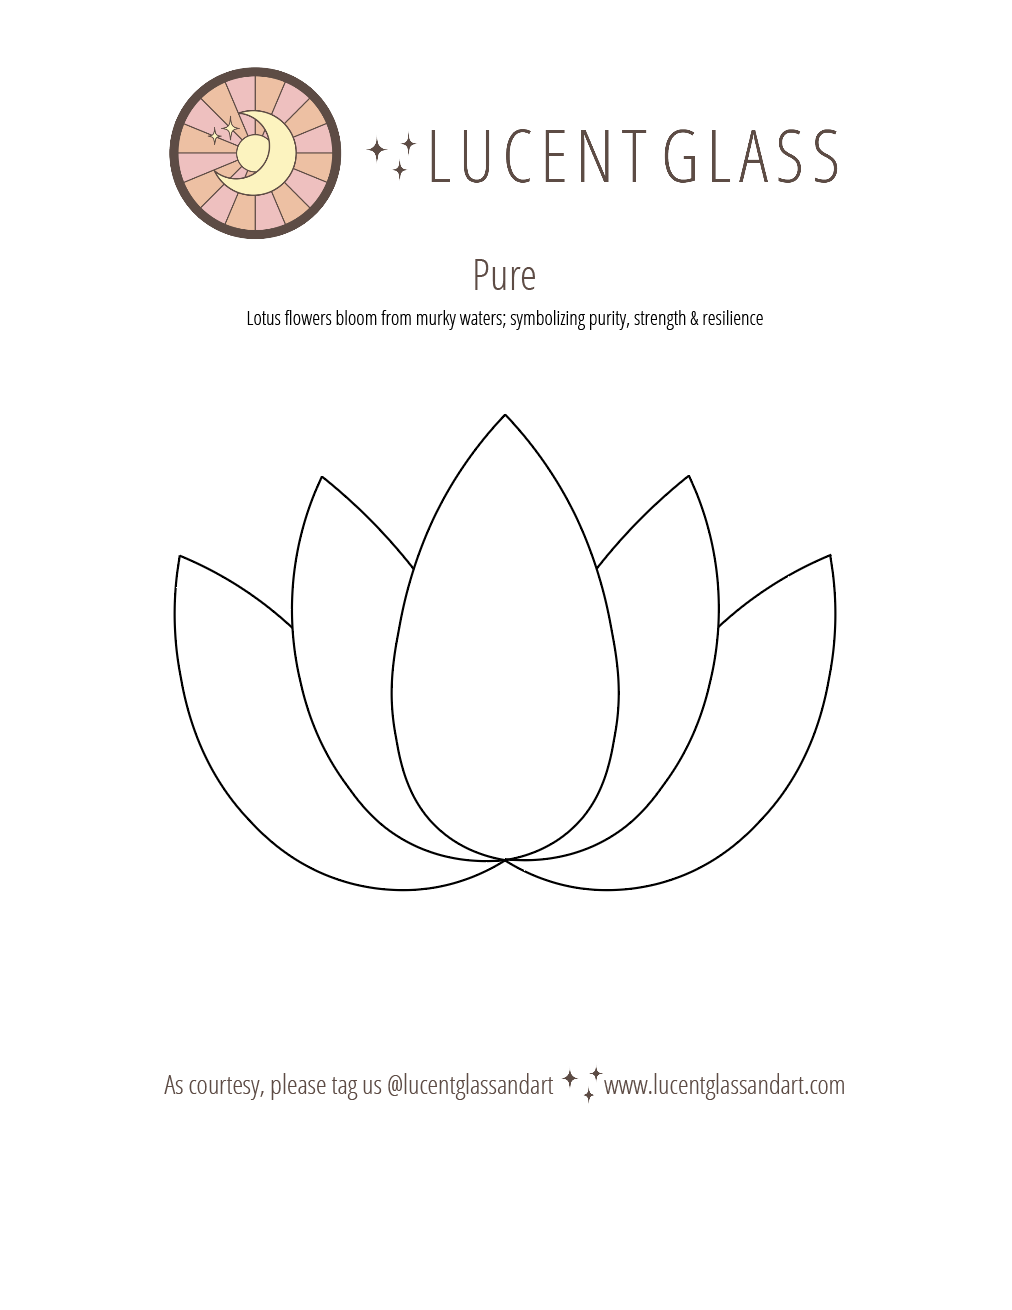 "Pure" lotus flower stained glass pattern